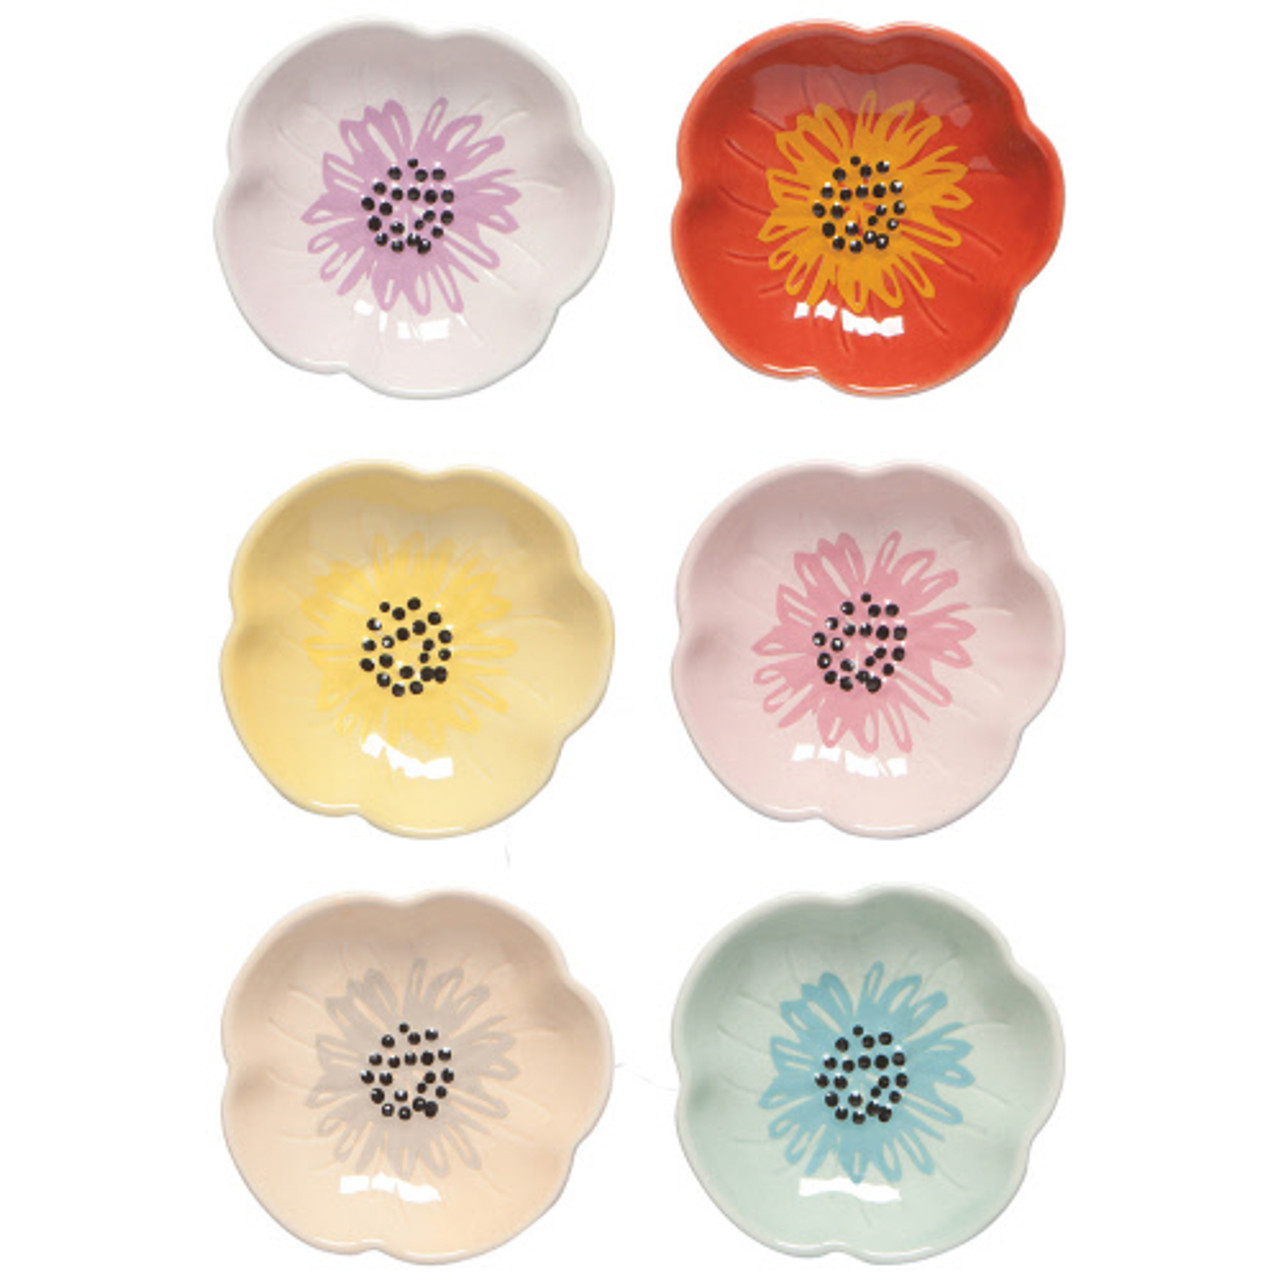 Bungalow Rose Ceramic Pinch Bowls Set Of 6, Small Bowls For Dipping -  Cooking Prep & Charcuterie Board Bowls, Soy Sauce Dish, Multicolor Handmade  Decorative Serving Dishes